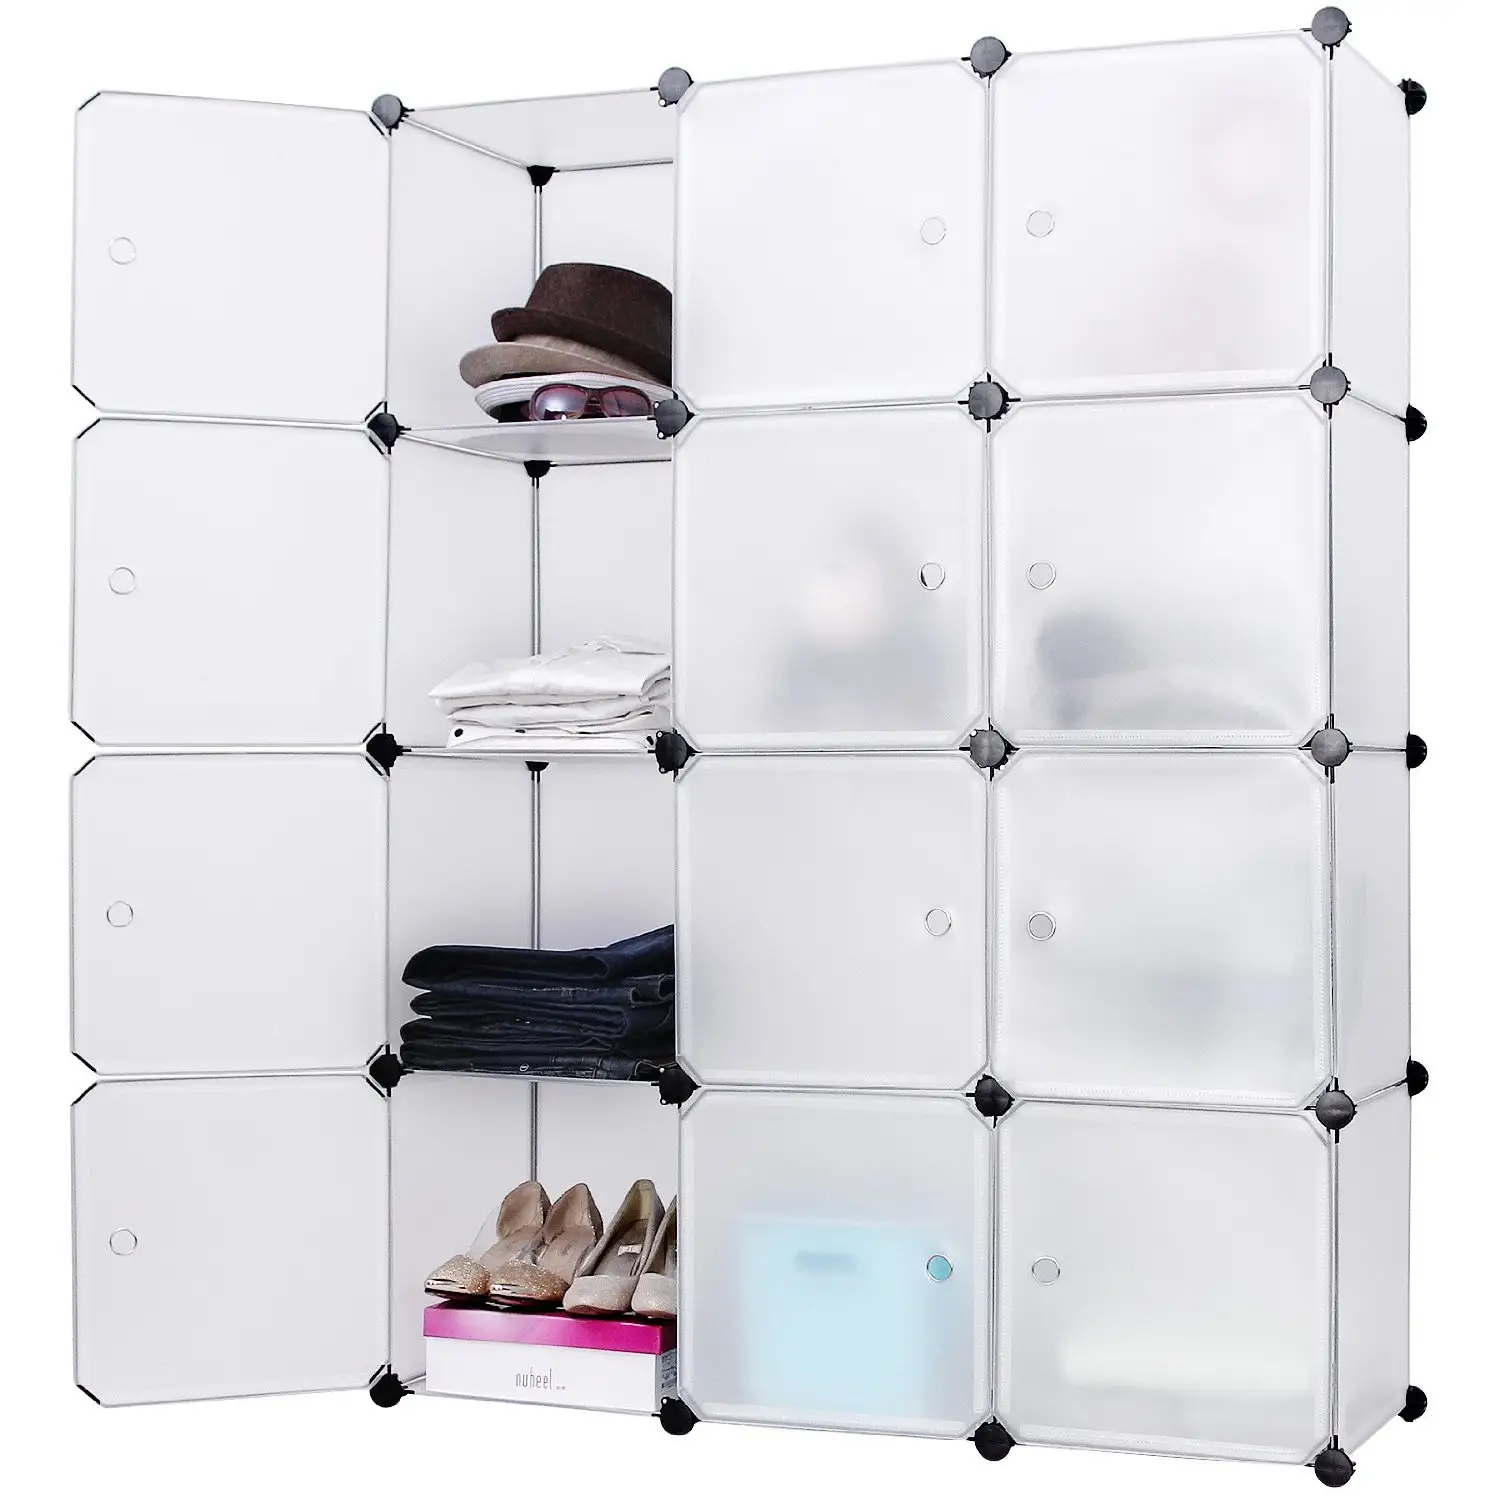 Plastic shelf storage cubes for Clothes, Shoes, Toys and Books, Easy to Assemble